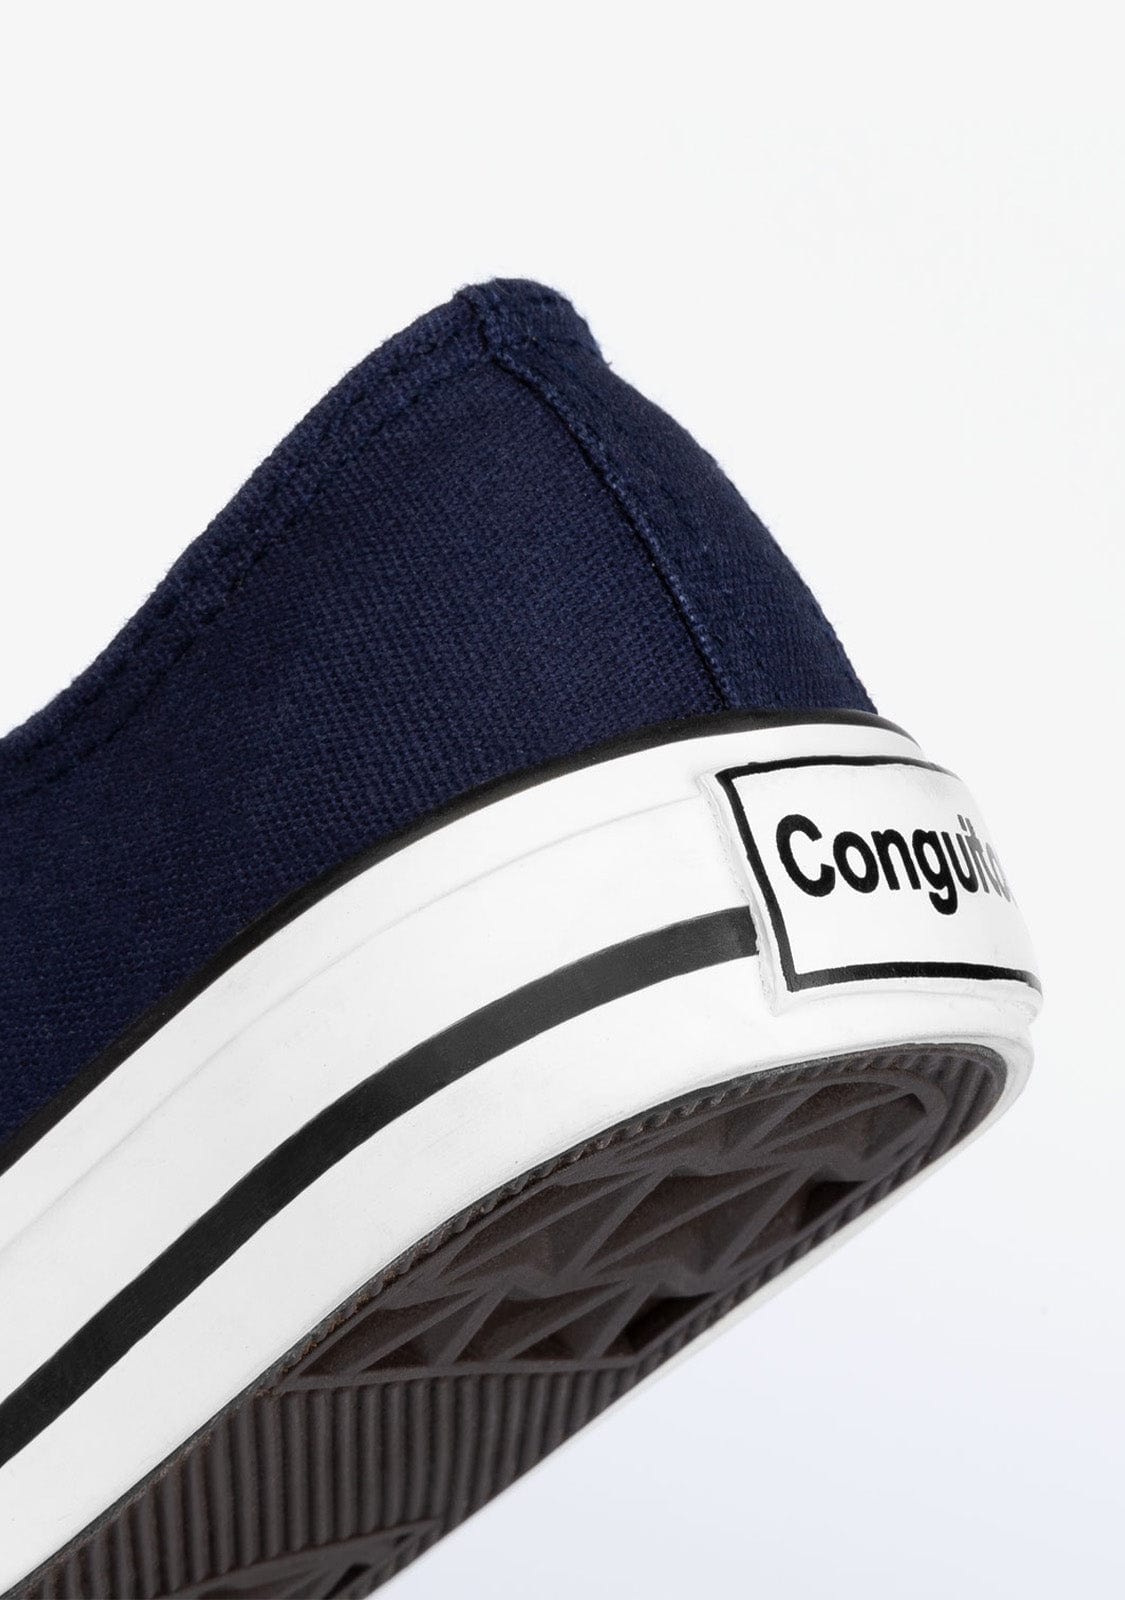 CONGUITOS Shoes Navy Basic Sneakers Canvas